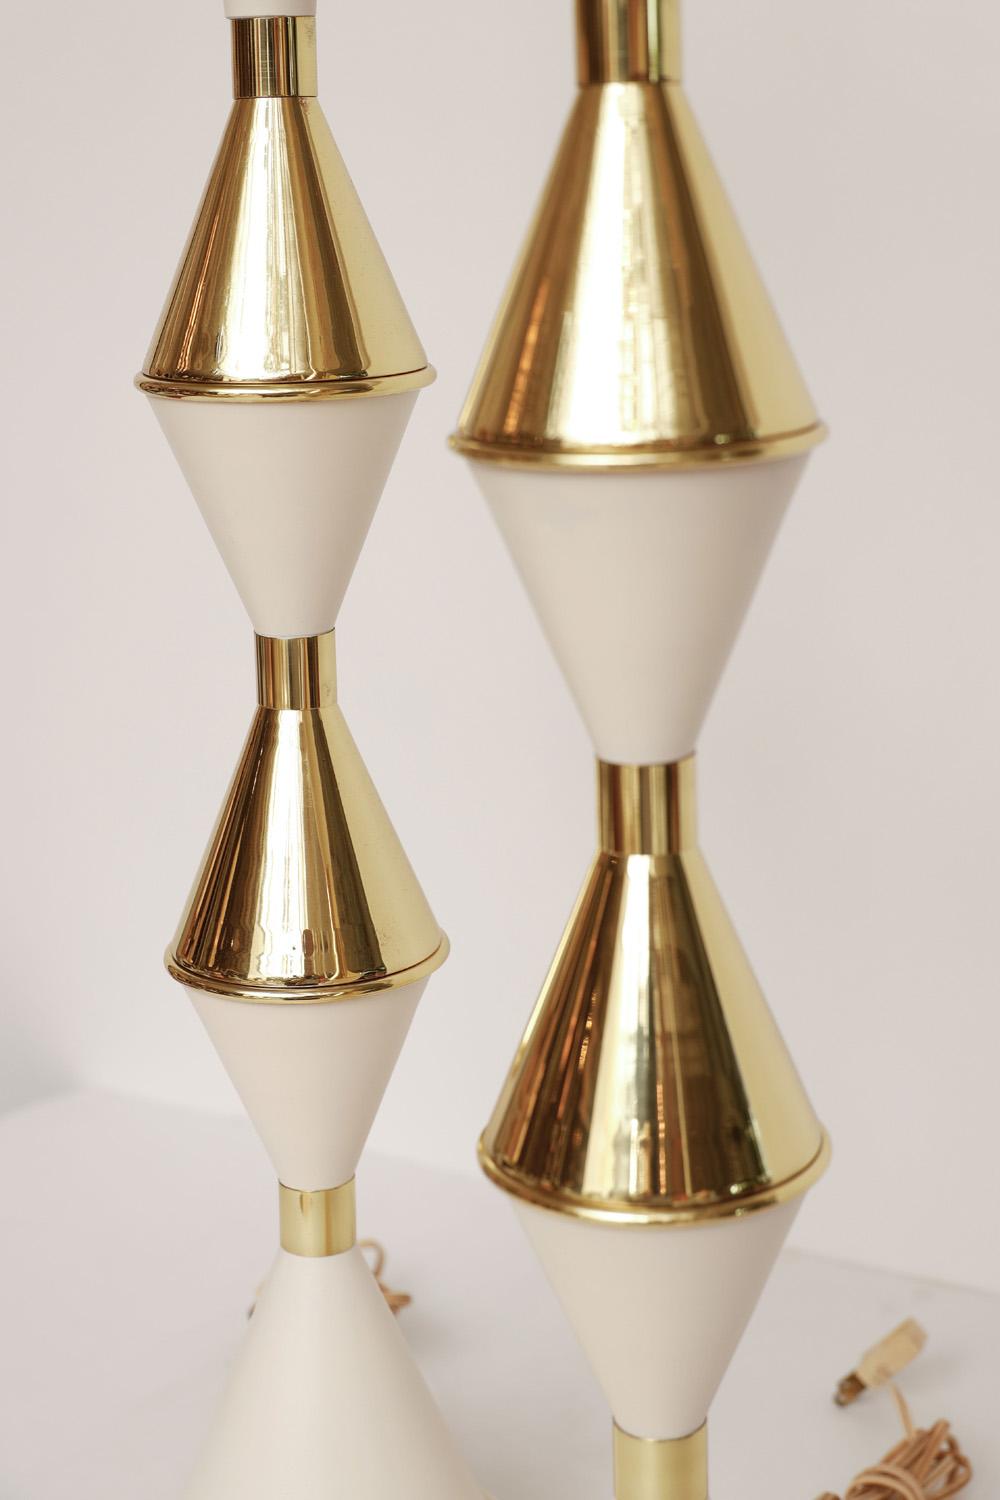 Impressive Pair of 1950's Polished Brass and White 4